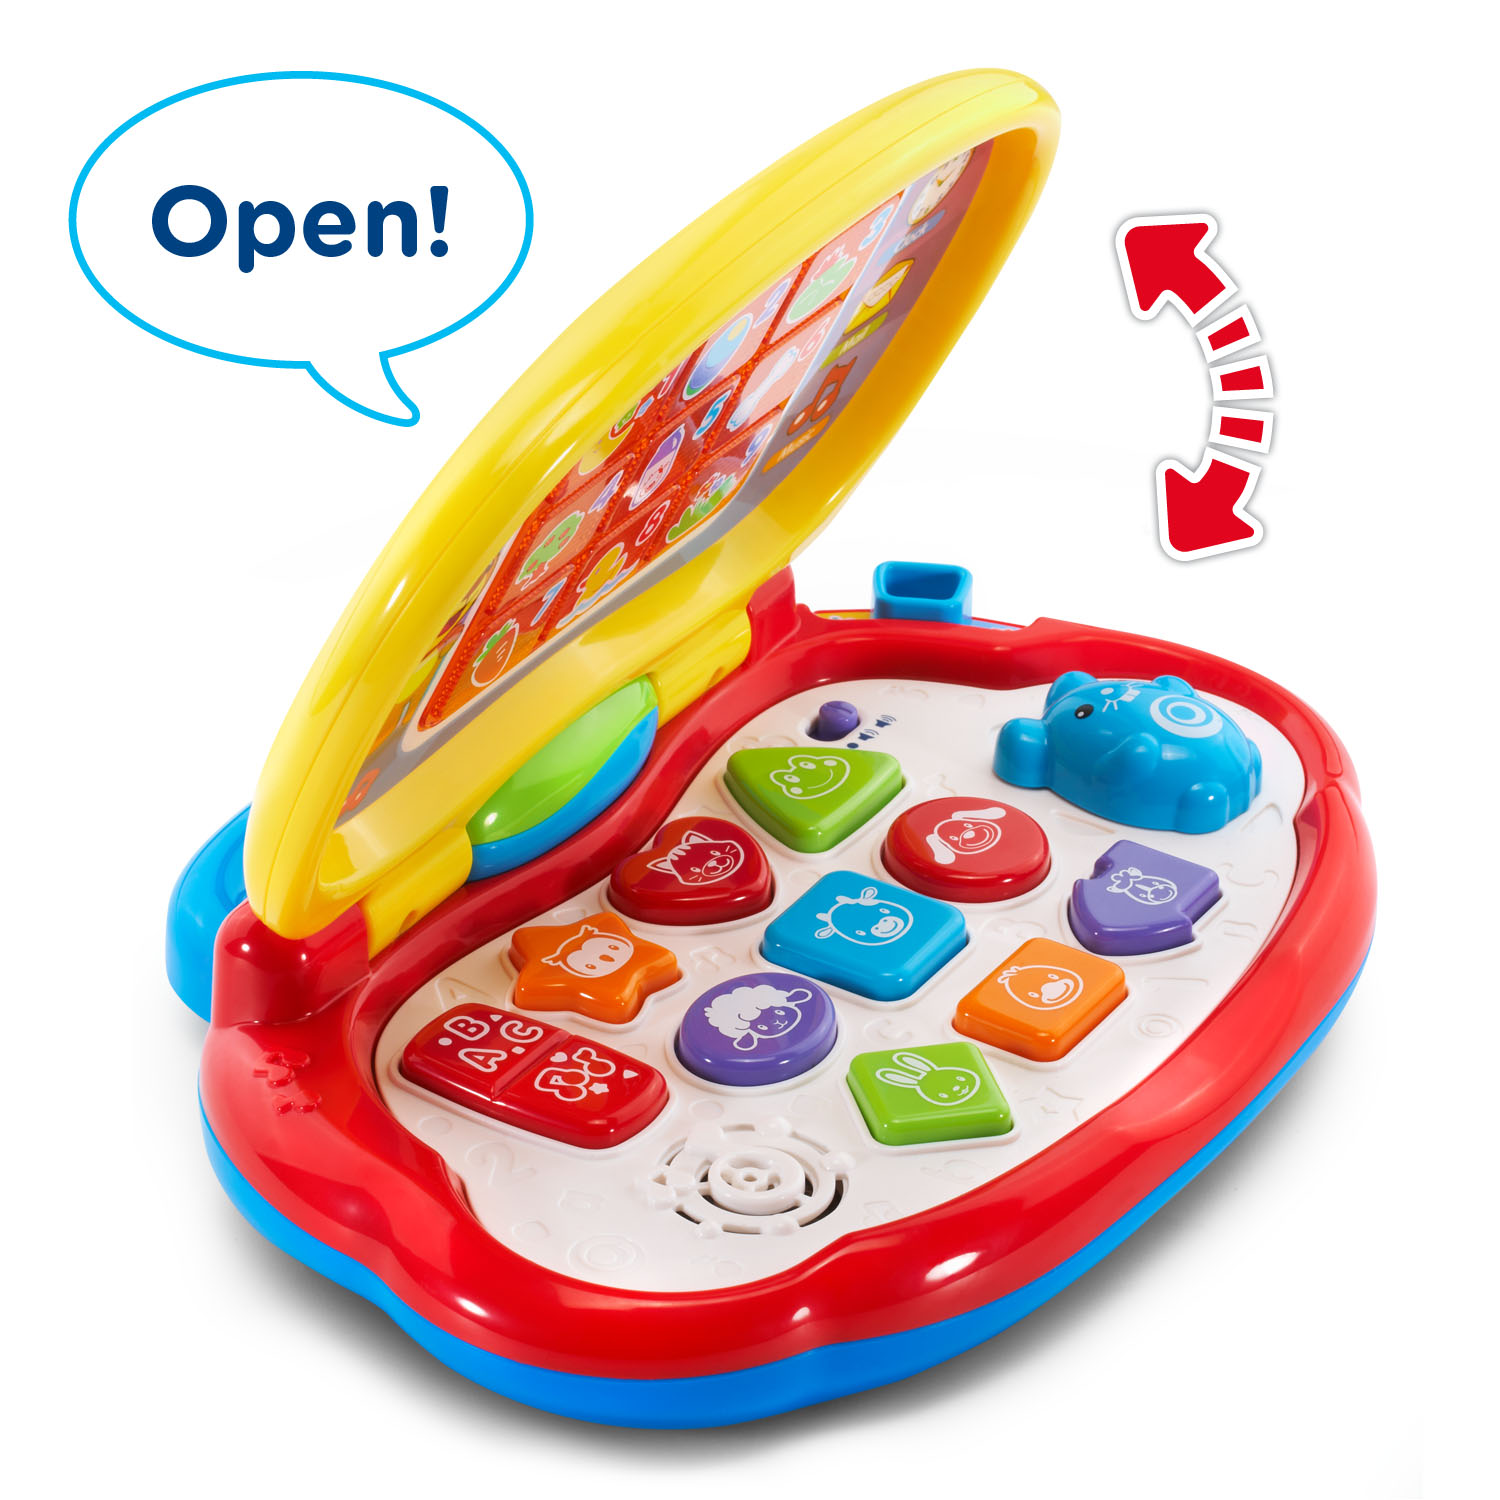 VTech Brilliant Baby Laptop Teaches Colors, Shapes, Animals and Music - image 5 of 7